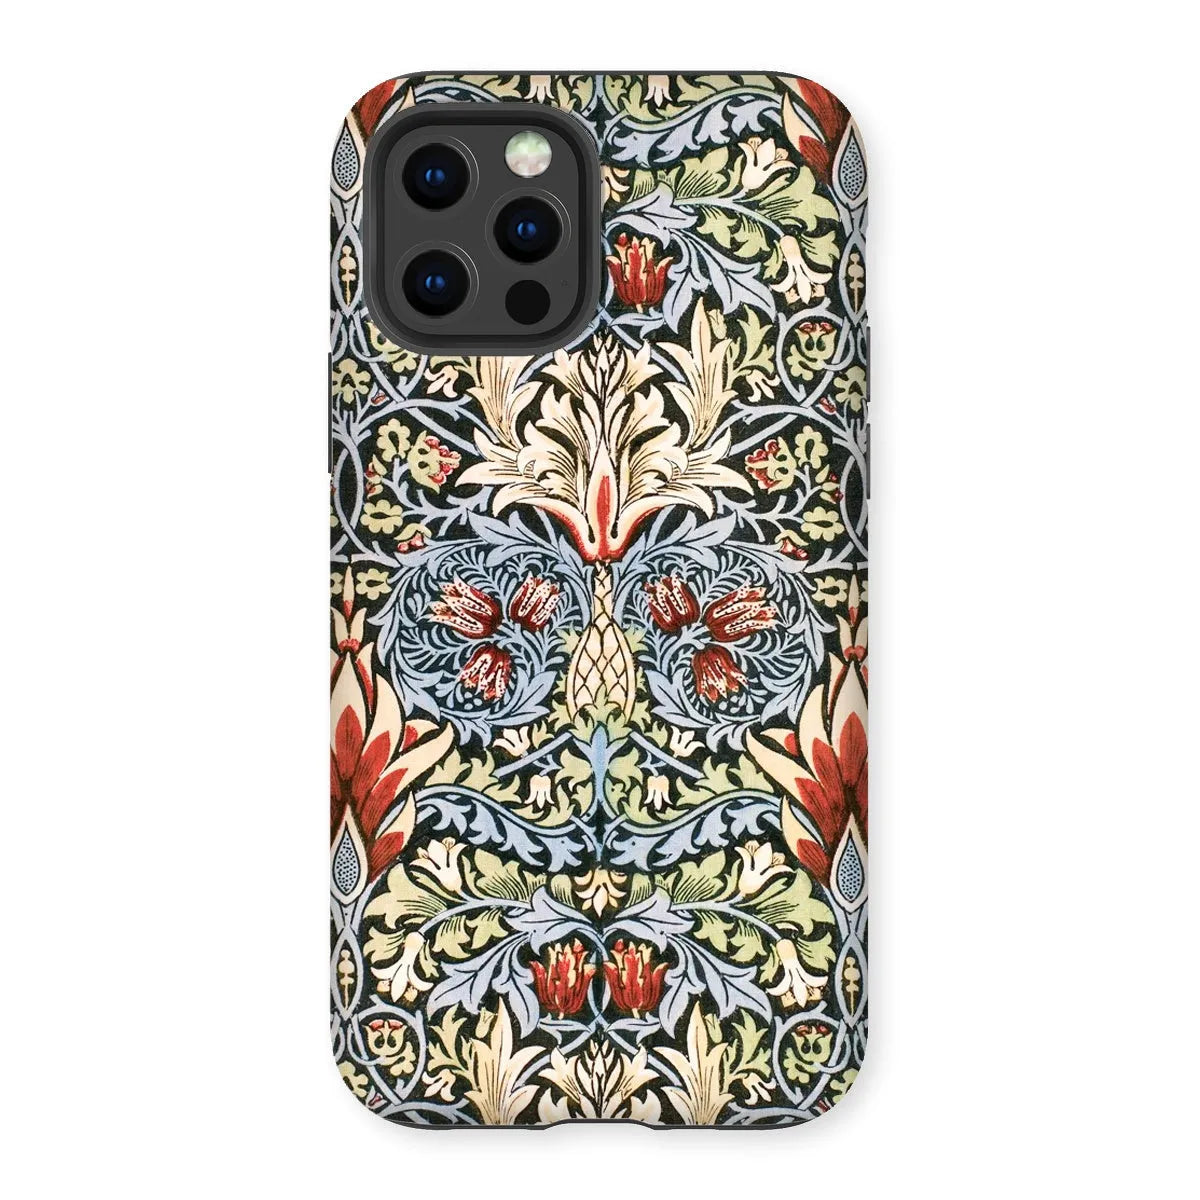 Snakeshead - Arts And Crafts Pattern Phone Case - William Morris - Iphone 12 Pro / Matte - Mobile Phone Cases